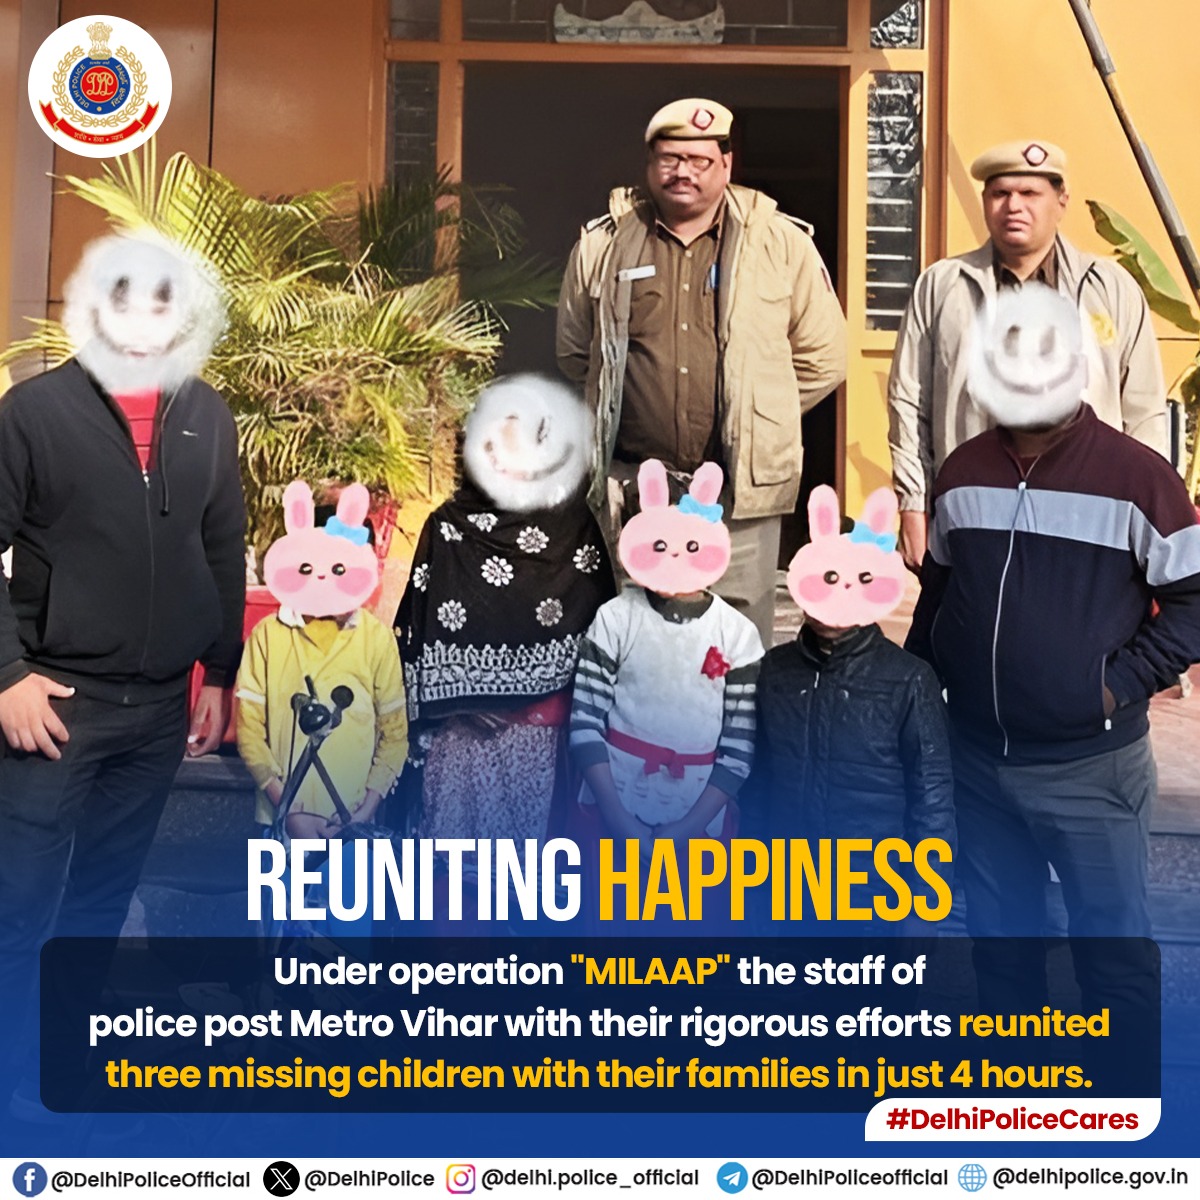 The team from Police Post Metro Vihar of @dcp_outernorth reunited three missing children in just 4 hours under operation 'Milap'

#DelhiPoliceCares
#OperationMilap